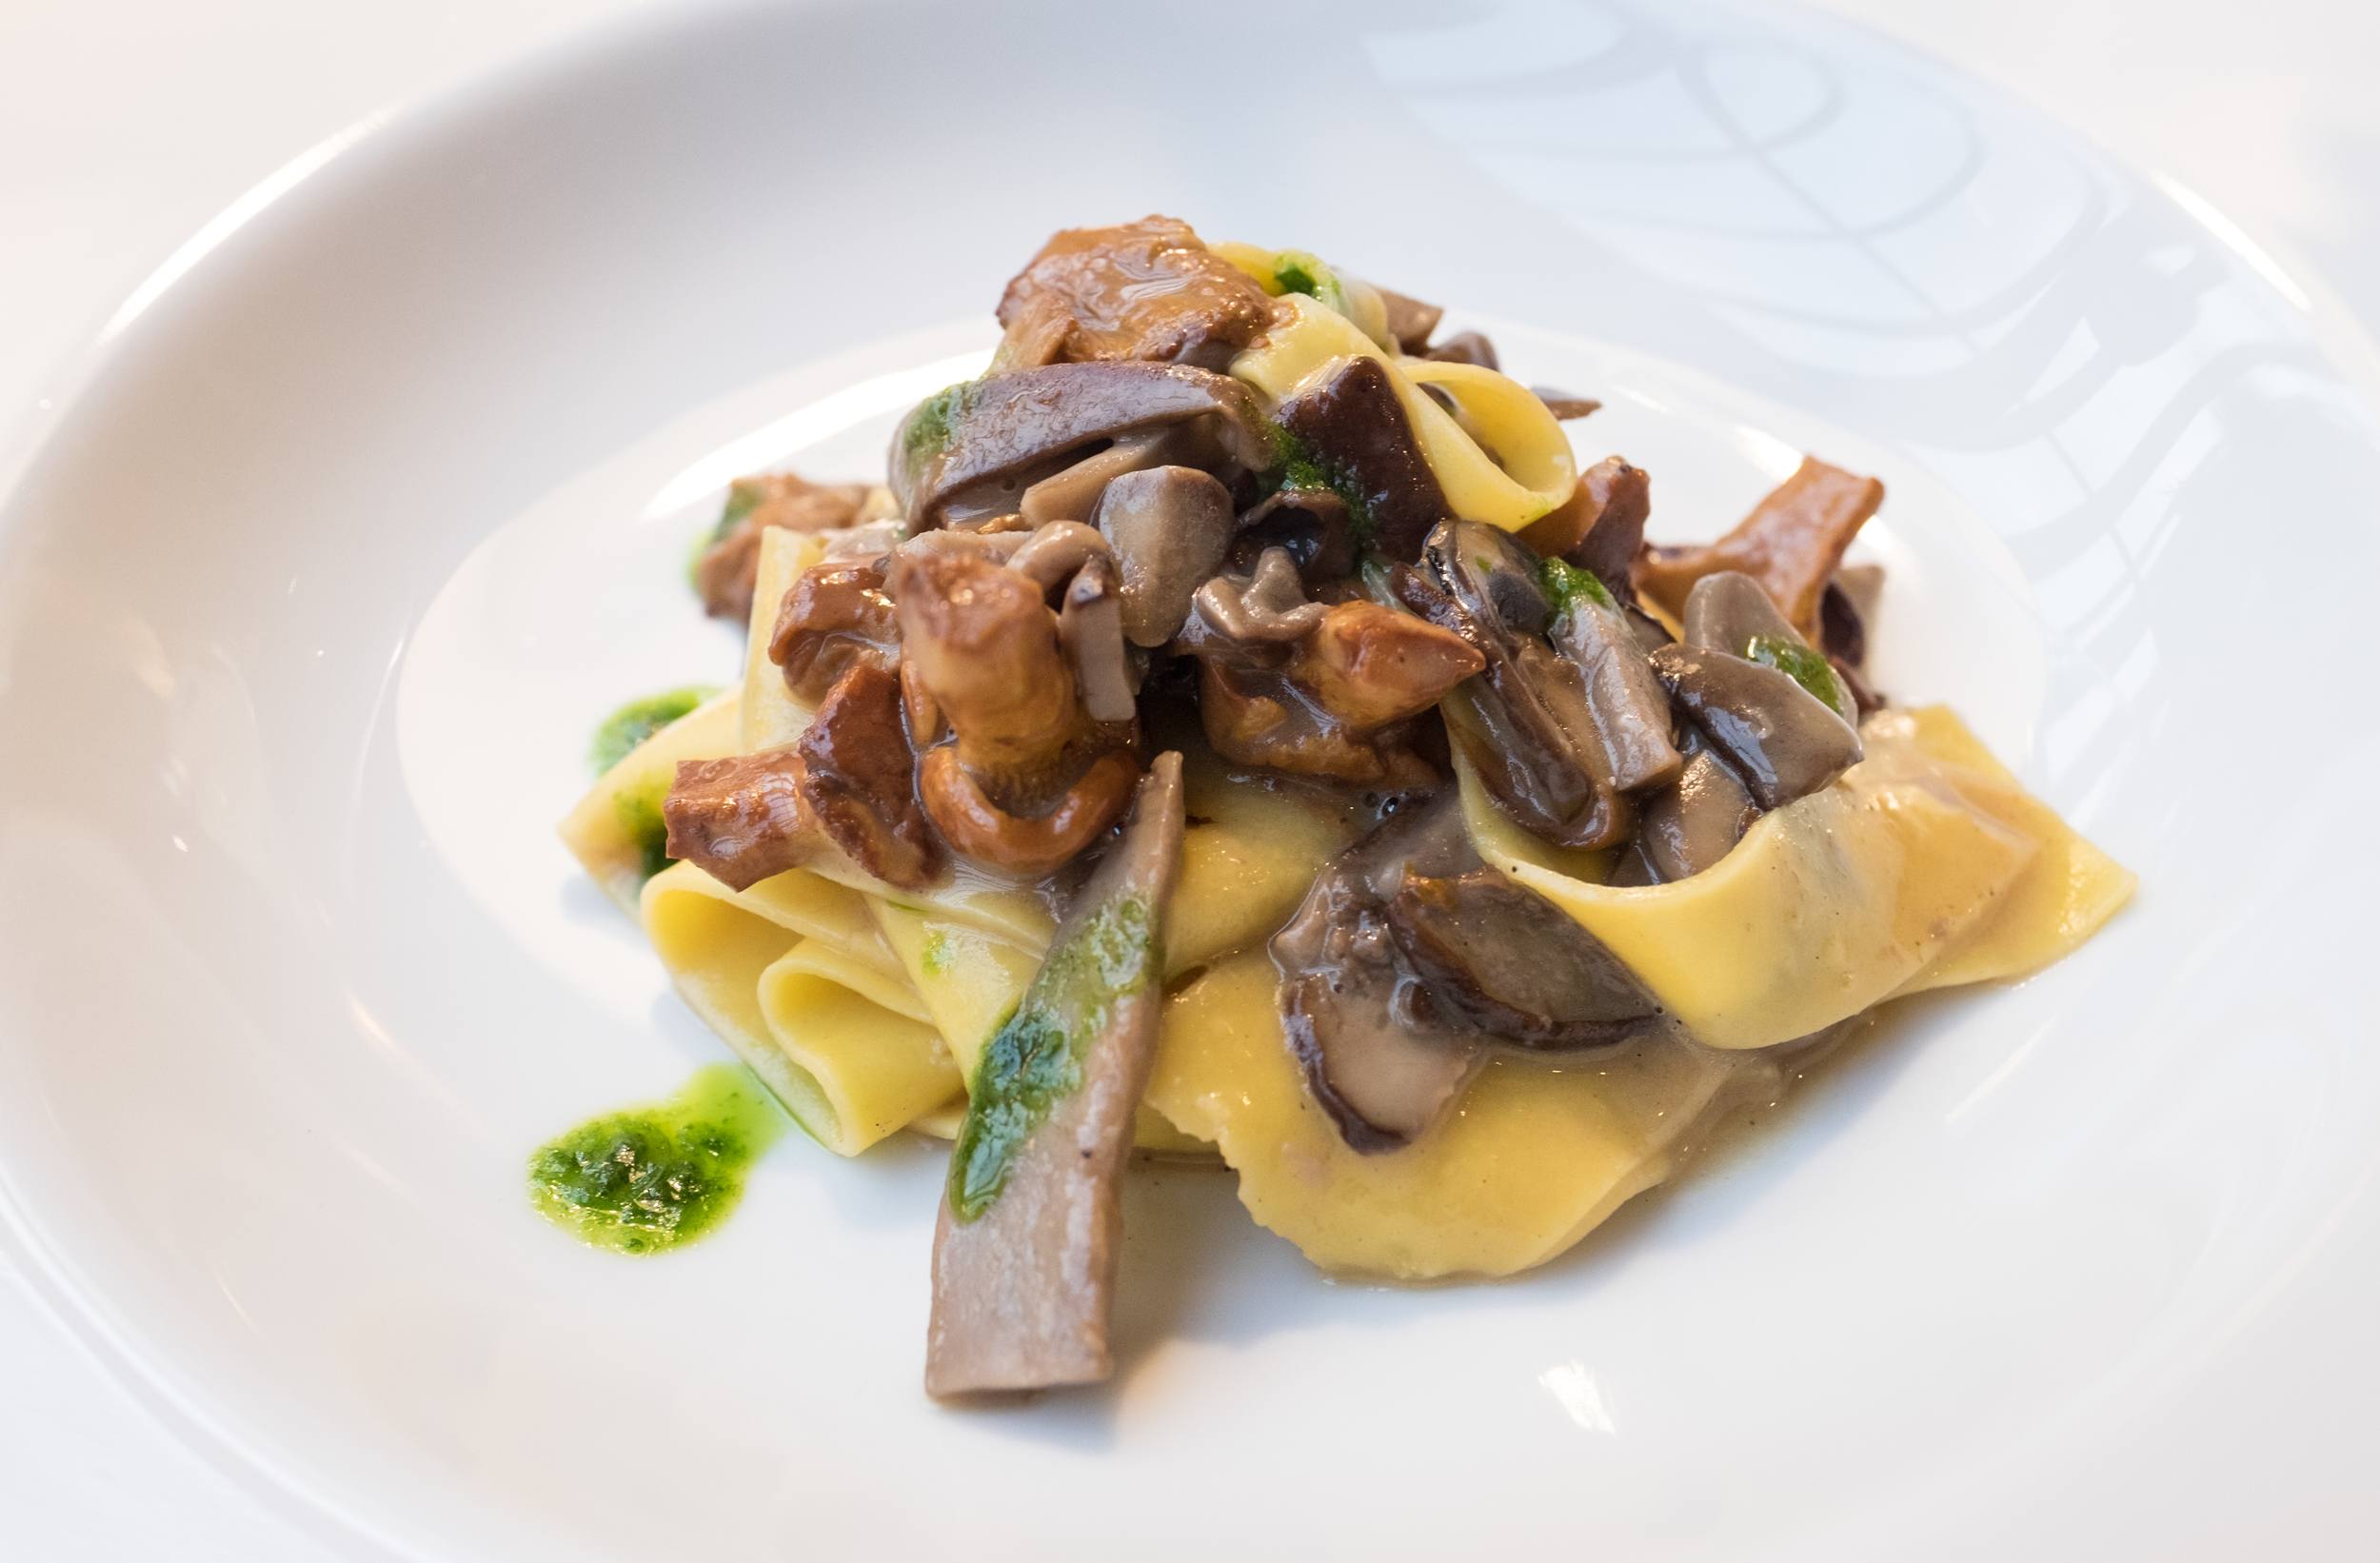 A plate of pappardelle (thick pasta noodles) topped with chanterelle mushrooms.